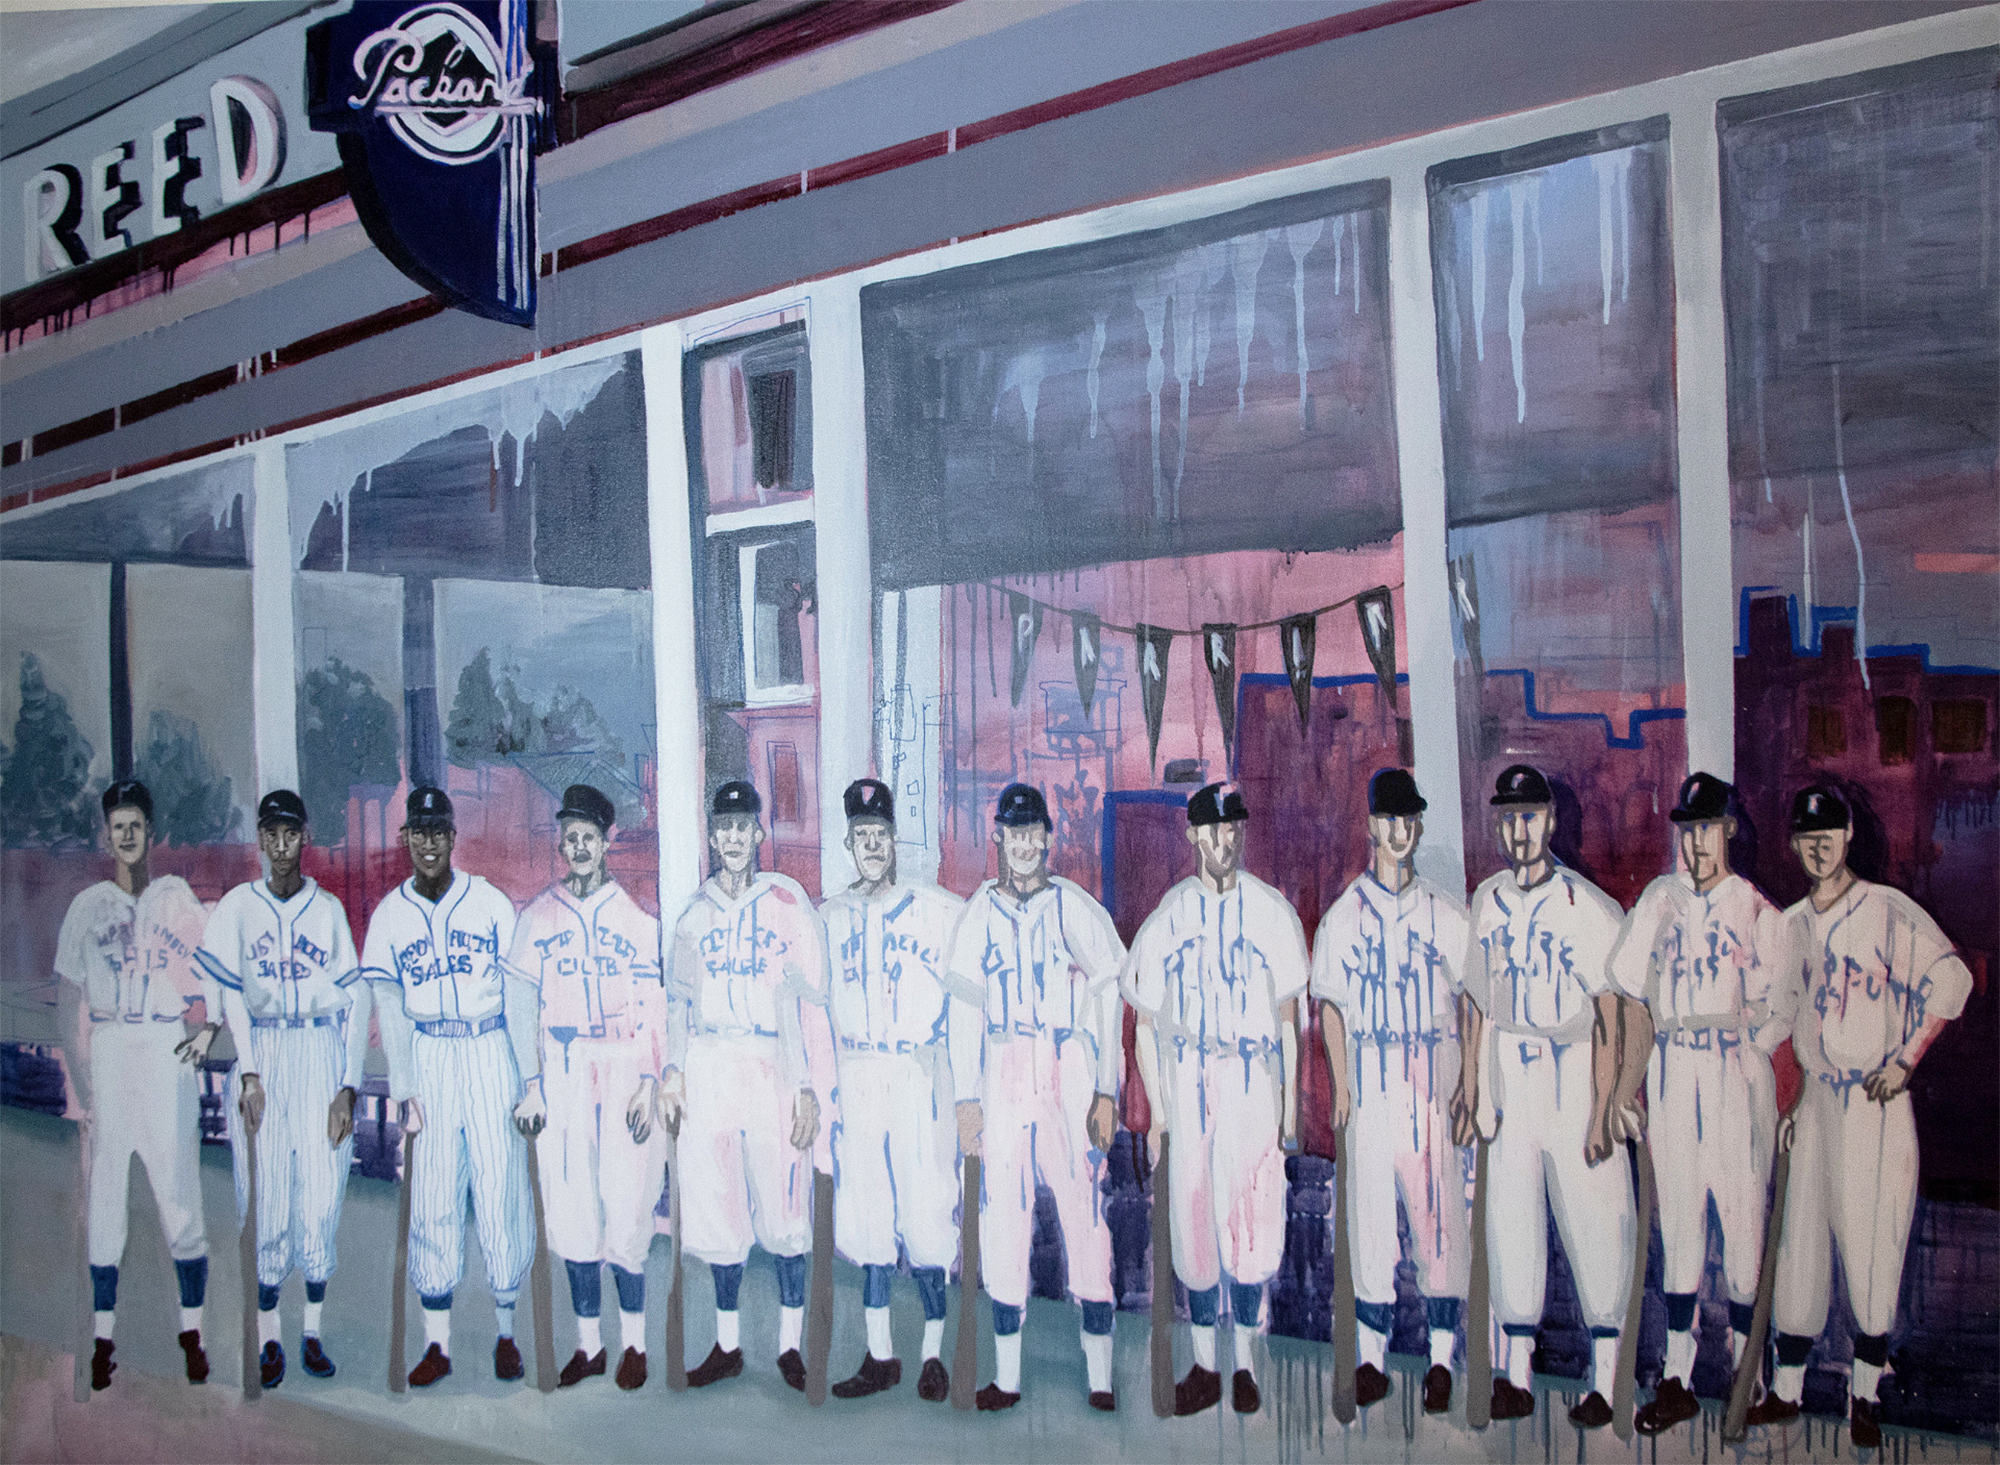 painting of an old-time baseball team with one Black player